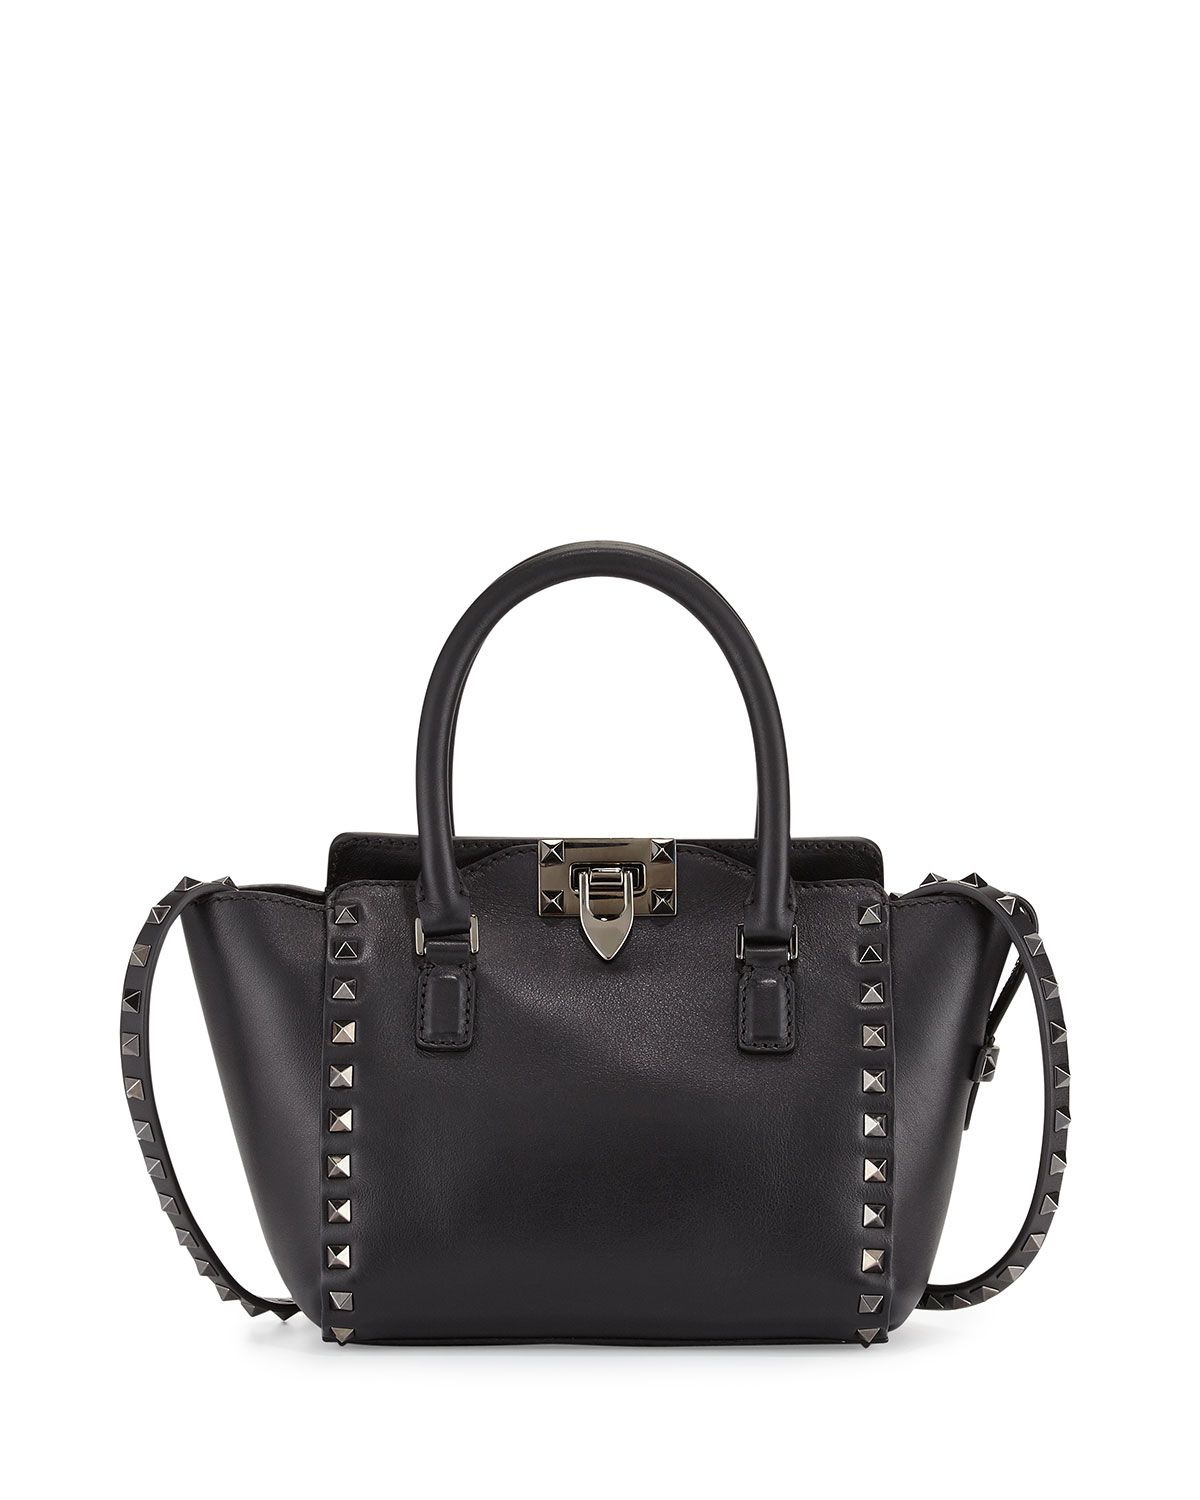 Lyst - Valentino Rockstud Small Leather Tote Bag in Black